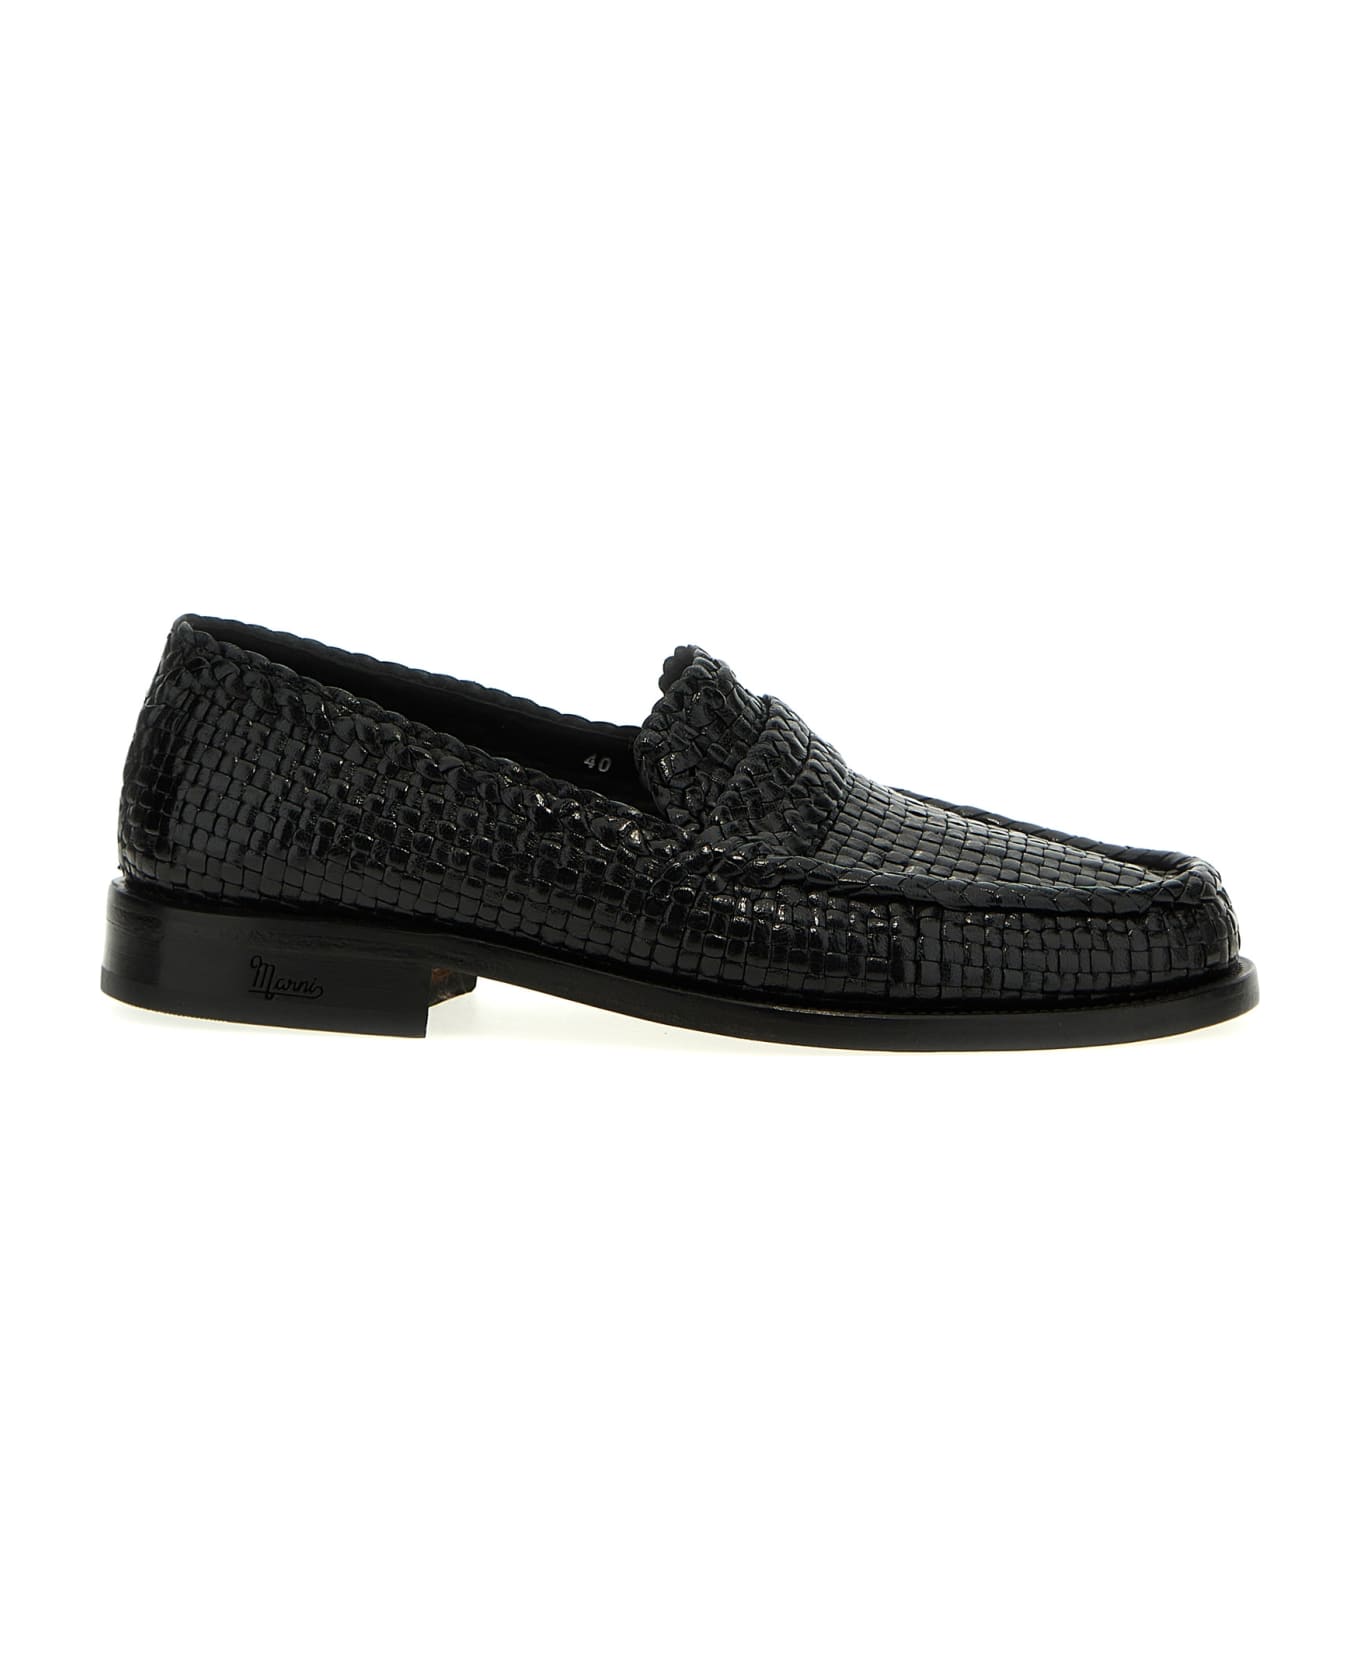 Marni Braided Leather Loafers